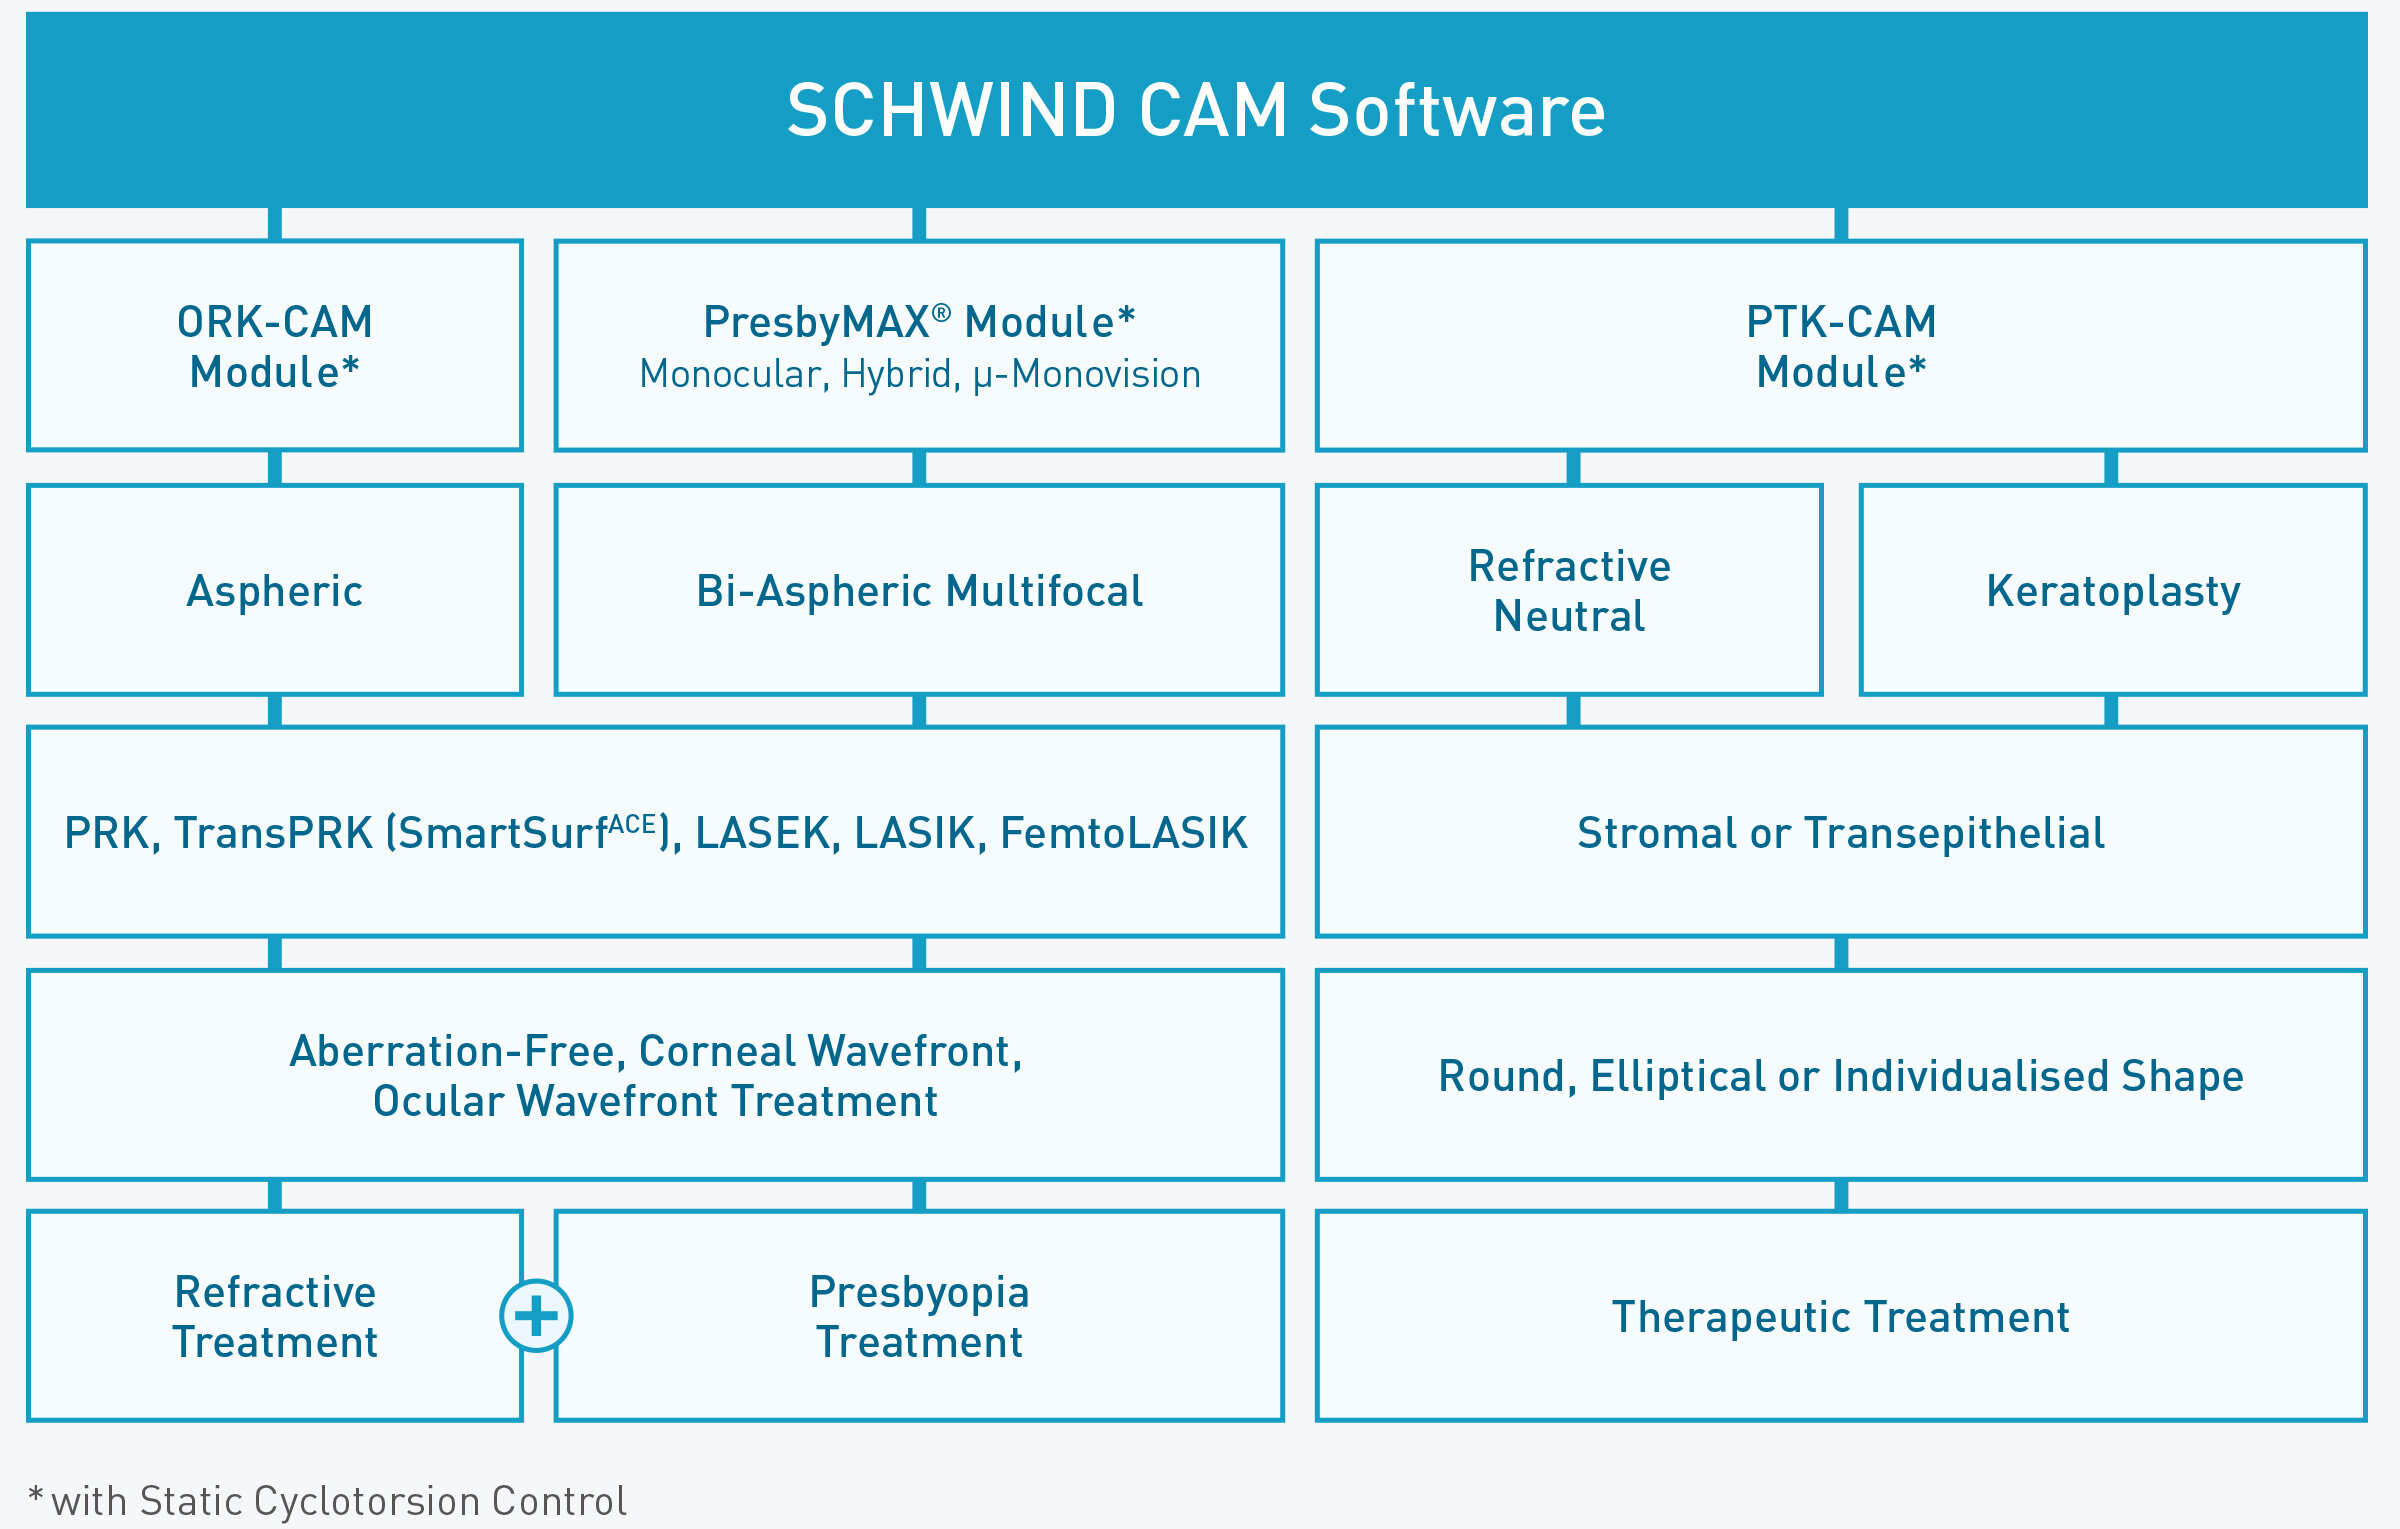 Overview of treatment structure with SCHWIND software